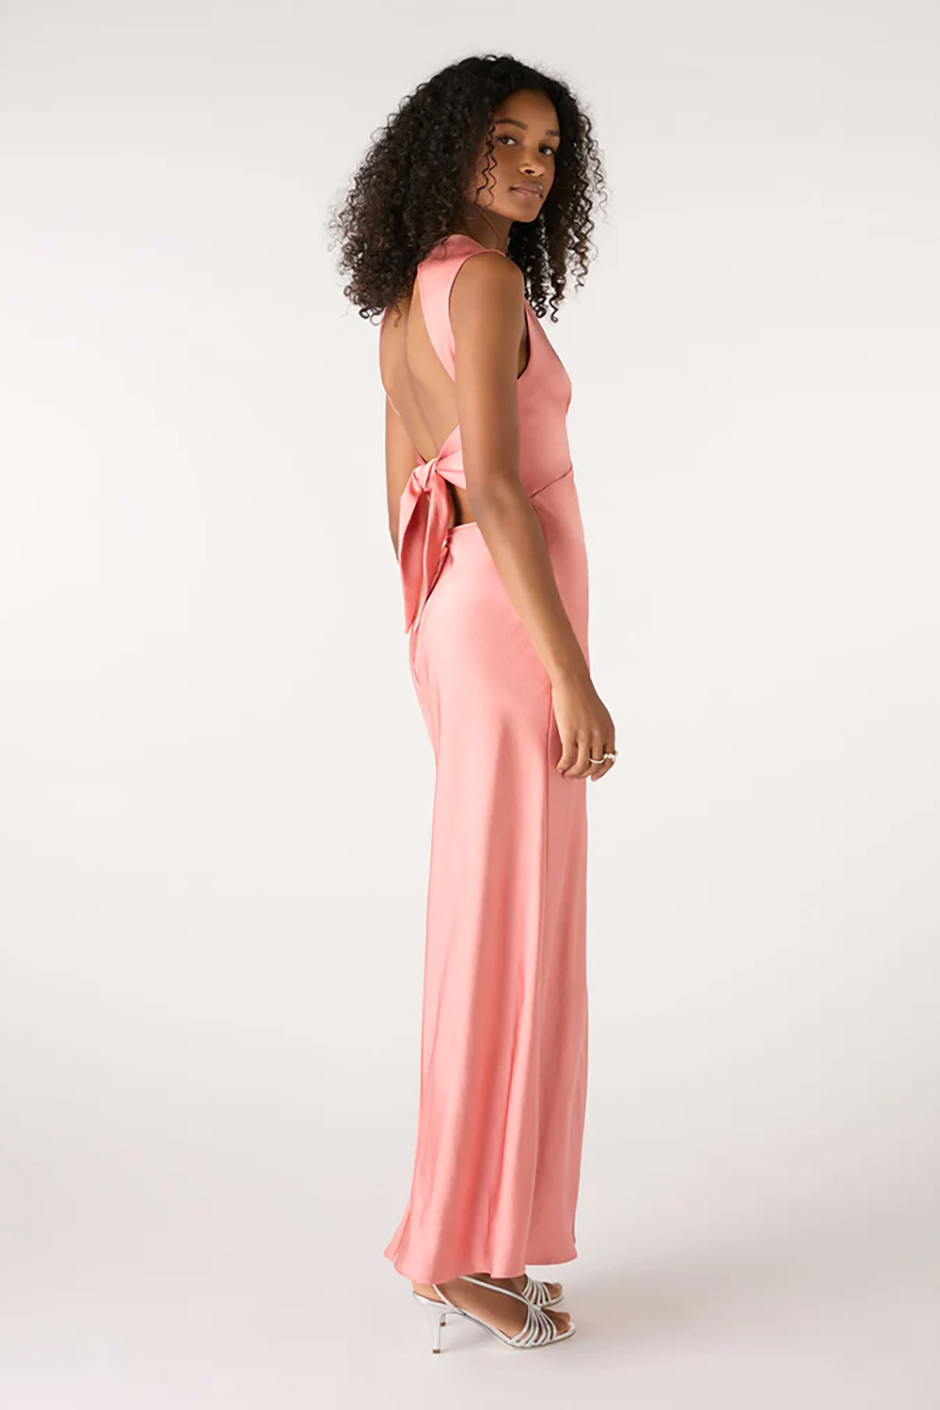 Pink peach bridesmaid dress from Omnes with maxi length and open tie back design 